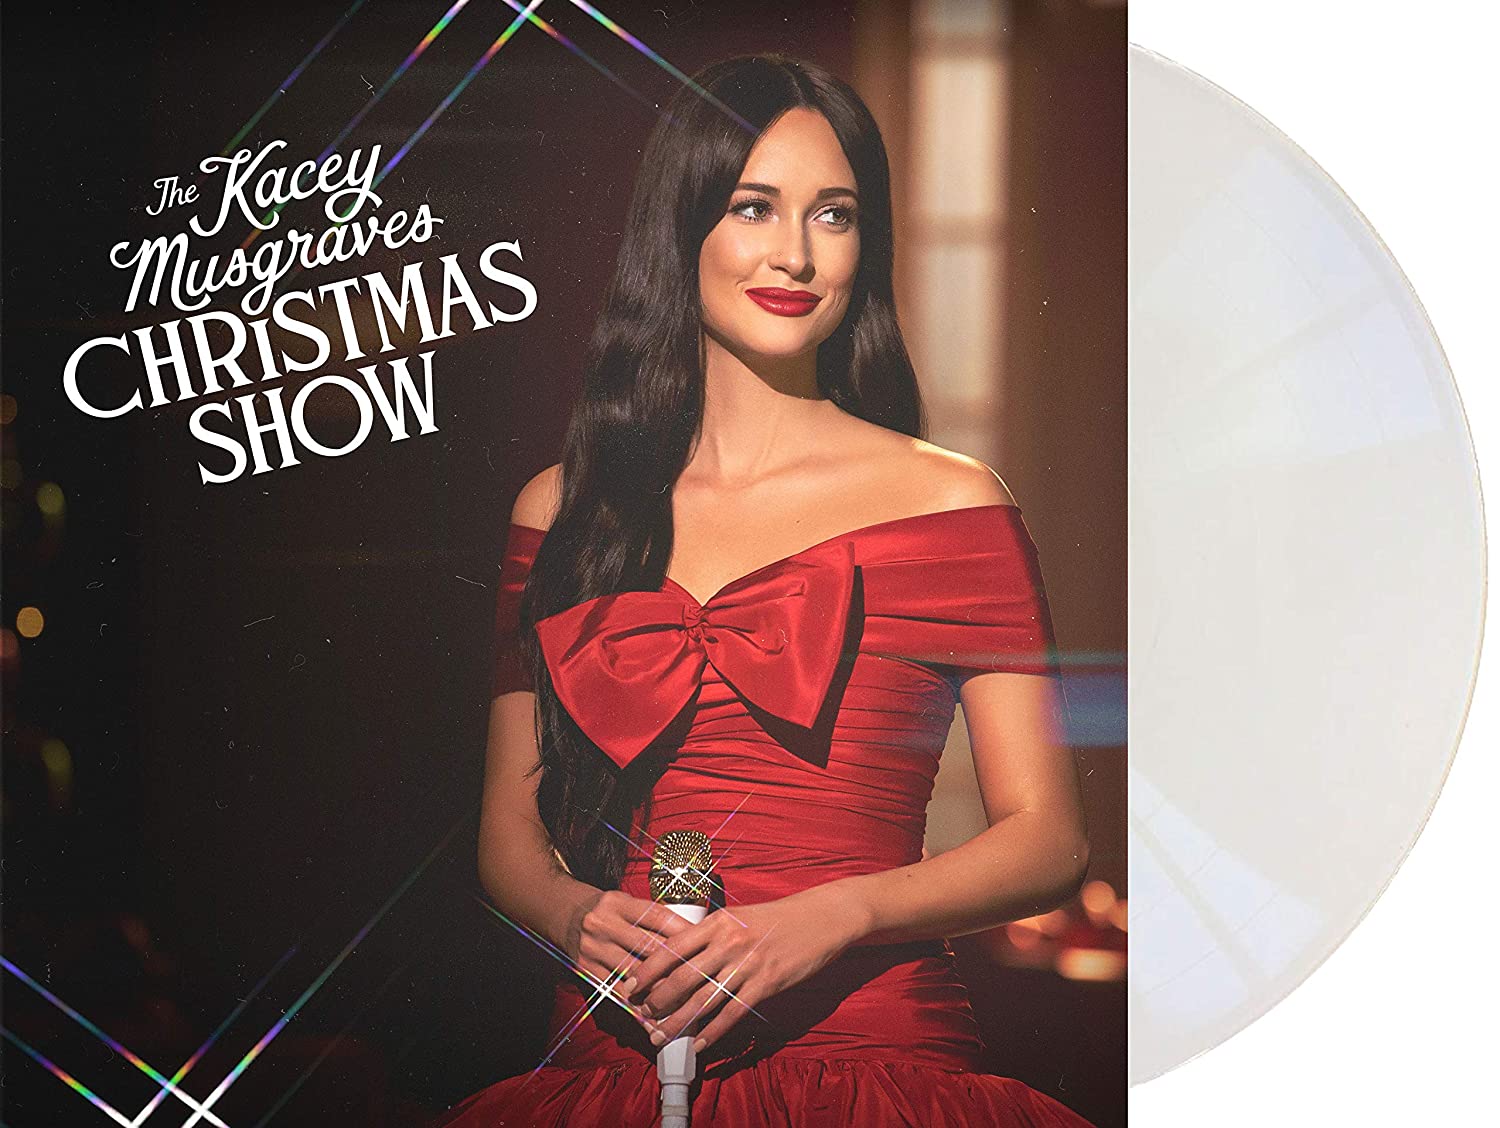 Kacey Musgraves | The Kacey Musgraves Christmas Show (Colored Vinyl, White) | Vinyl